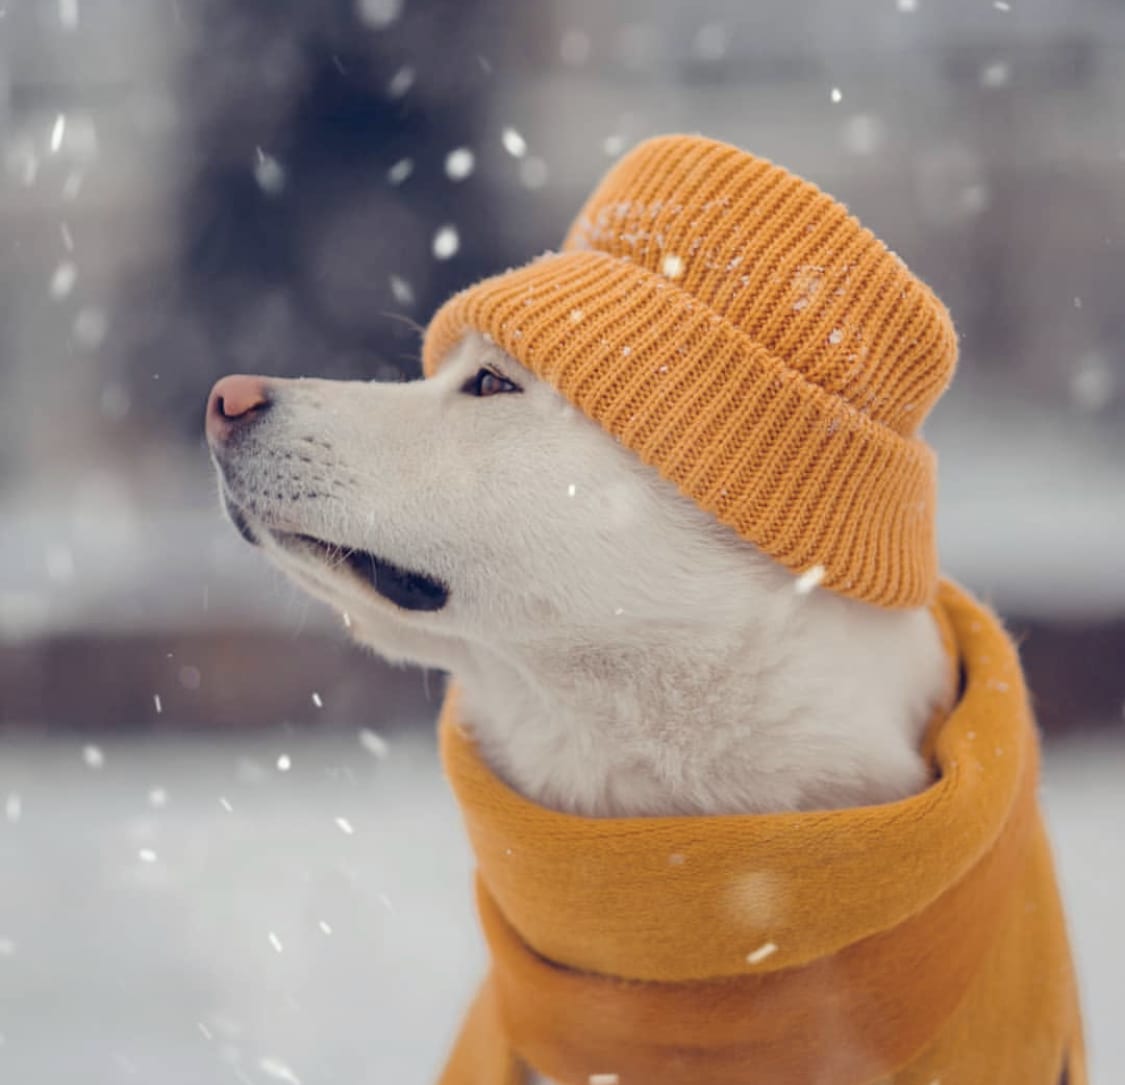 Akita outdoors while snowing, wearing a mustard beanie and a shawl around its neck while looking sideways